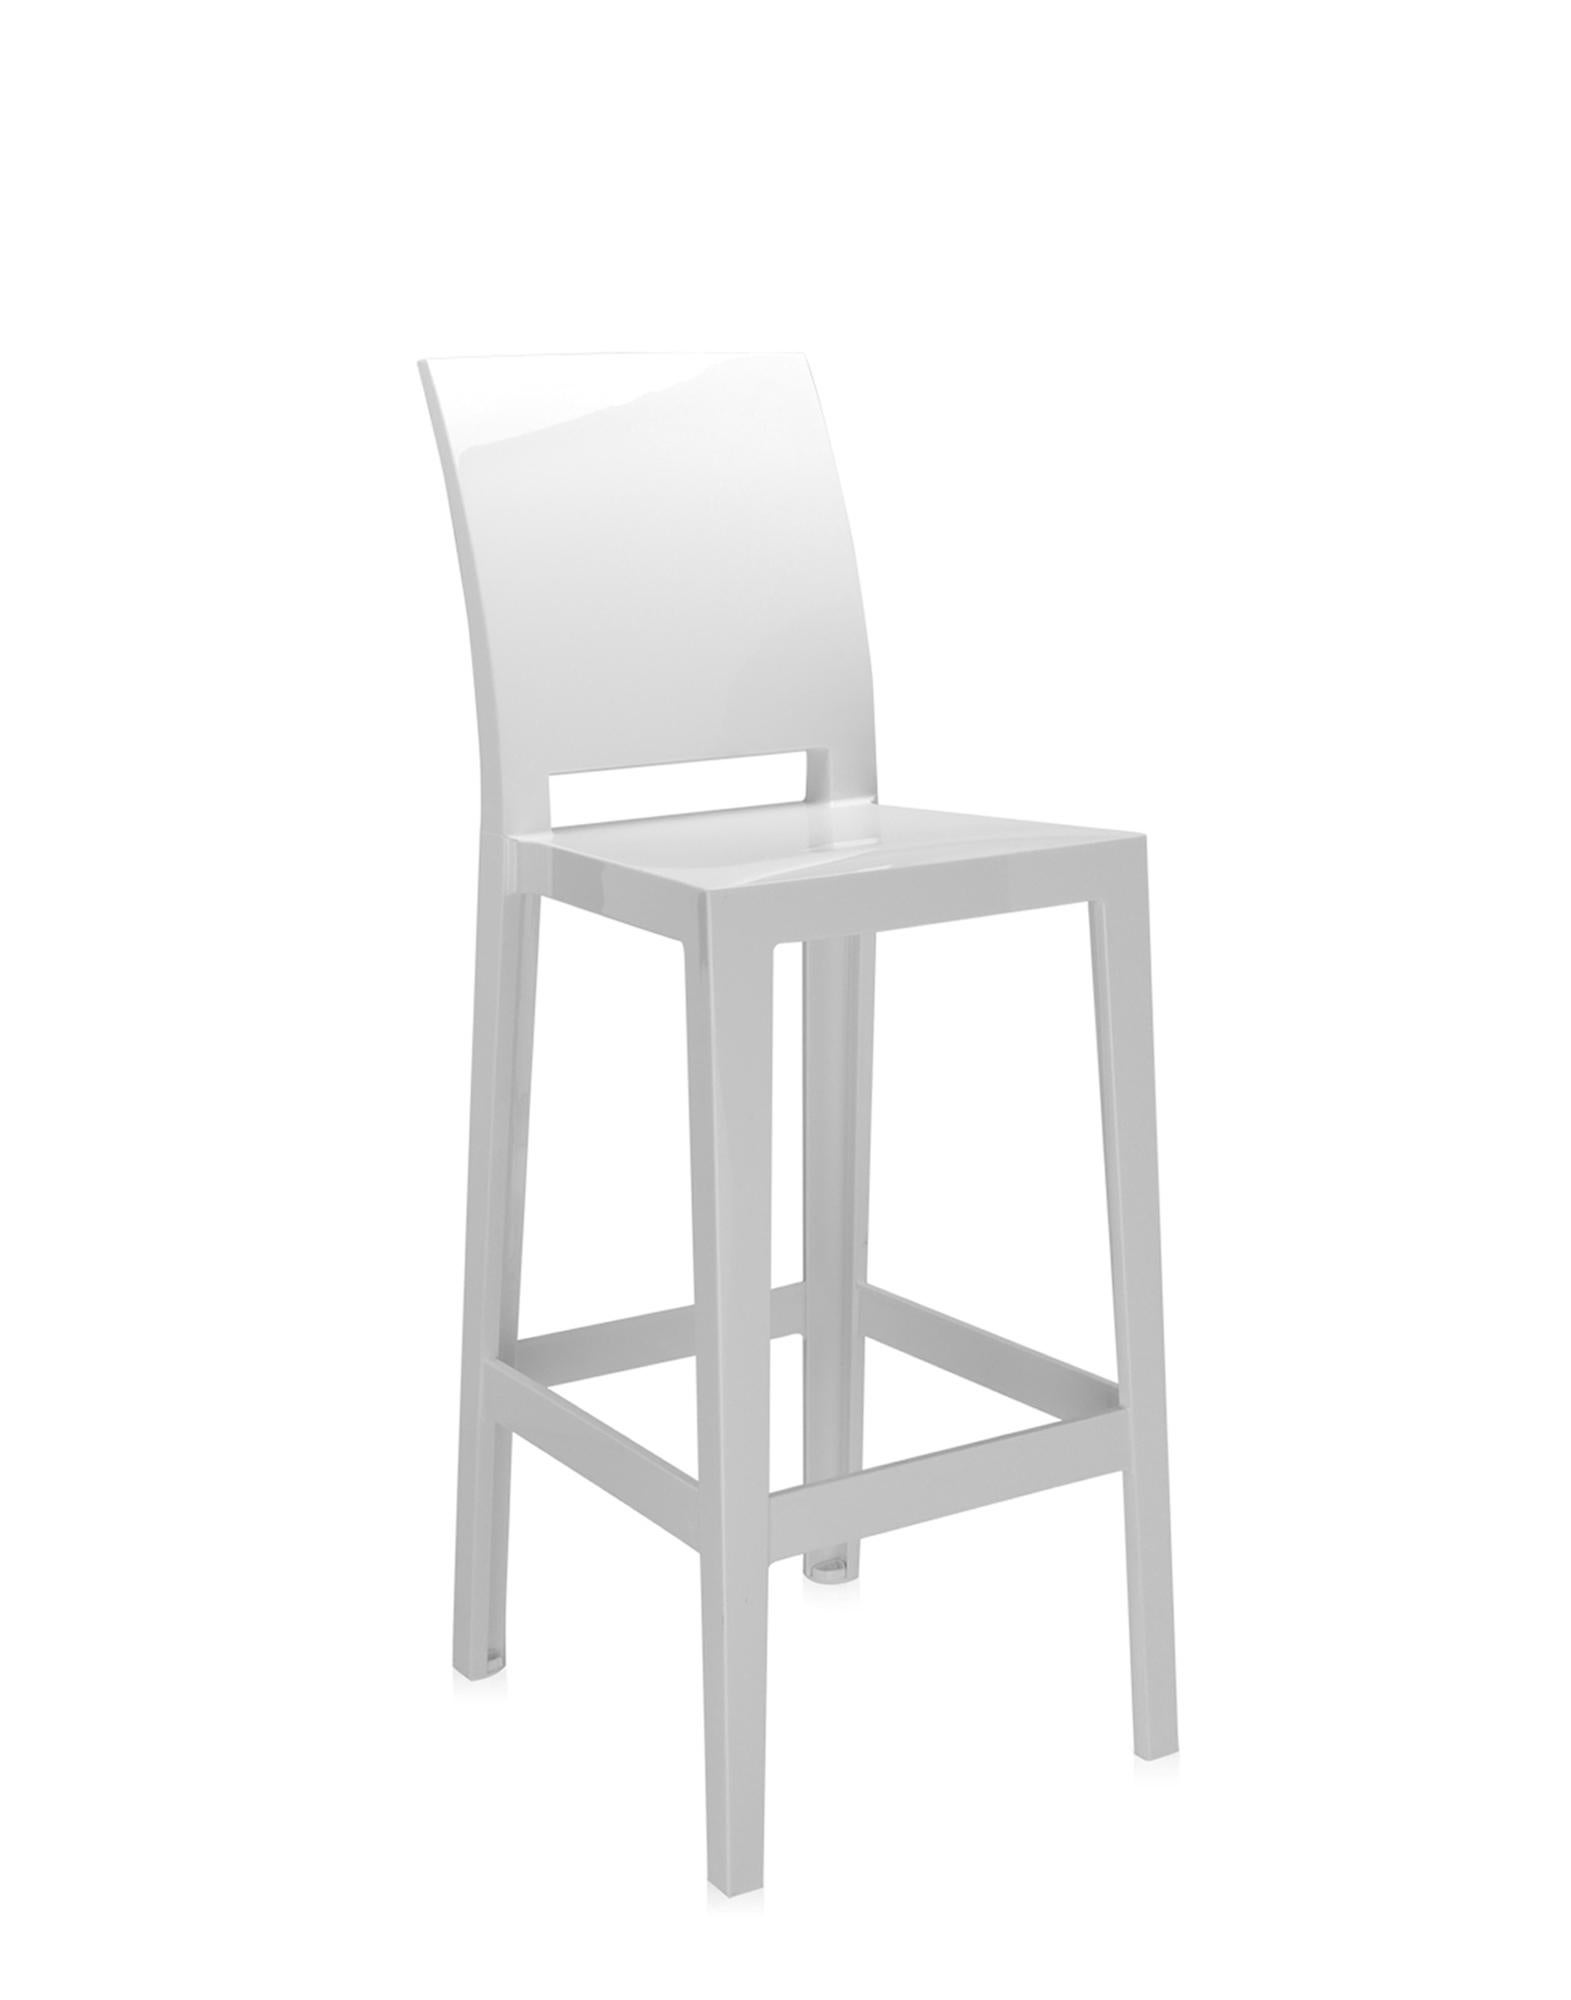 If you want to sip a drink at the bar in peace and quiet, you need a comfortable tall stool with a back to lean against. Sometimes one drink is not enough, and you need 